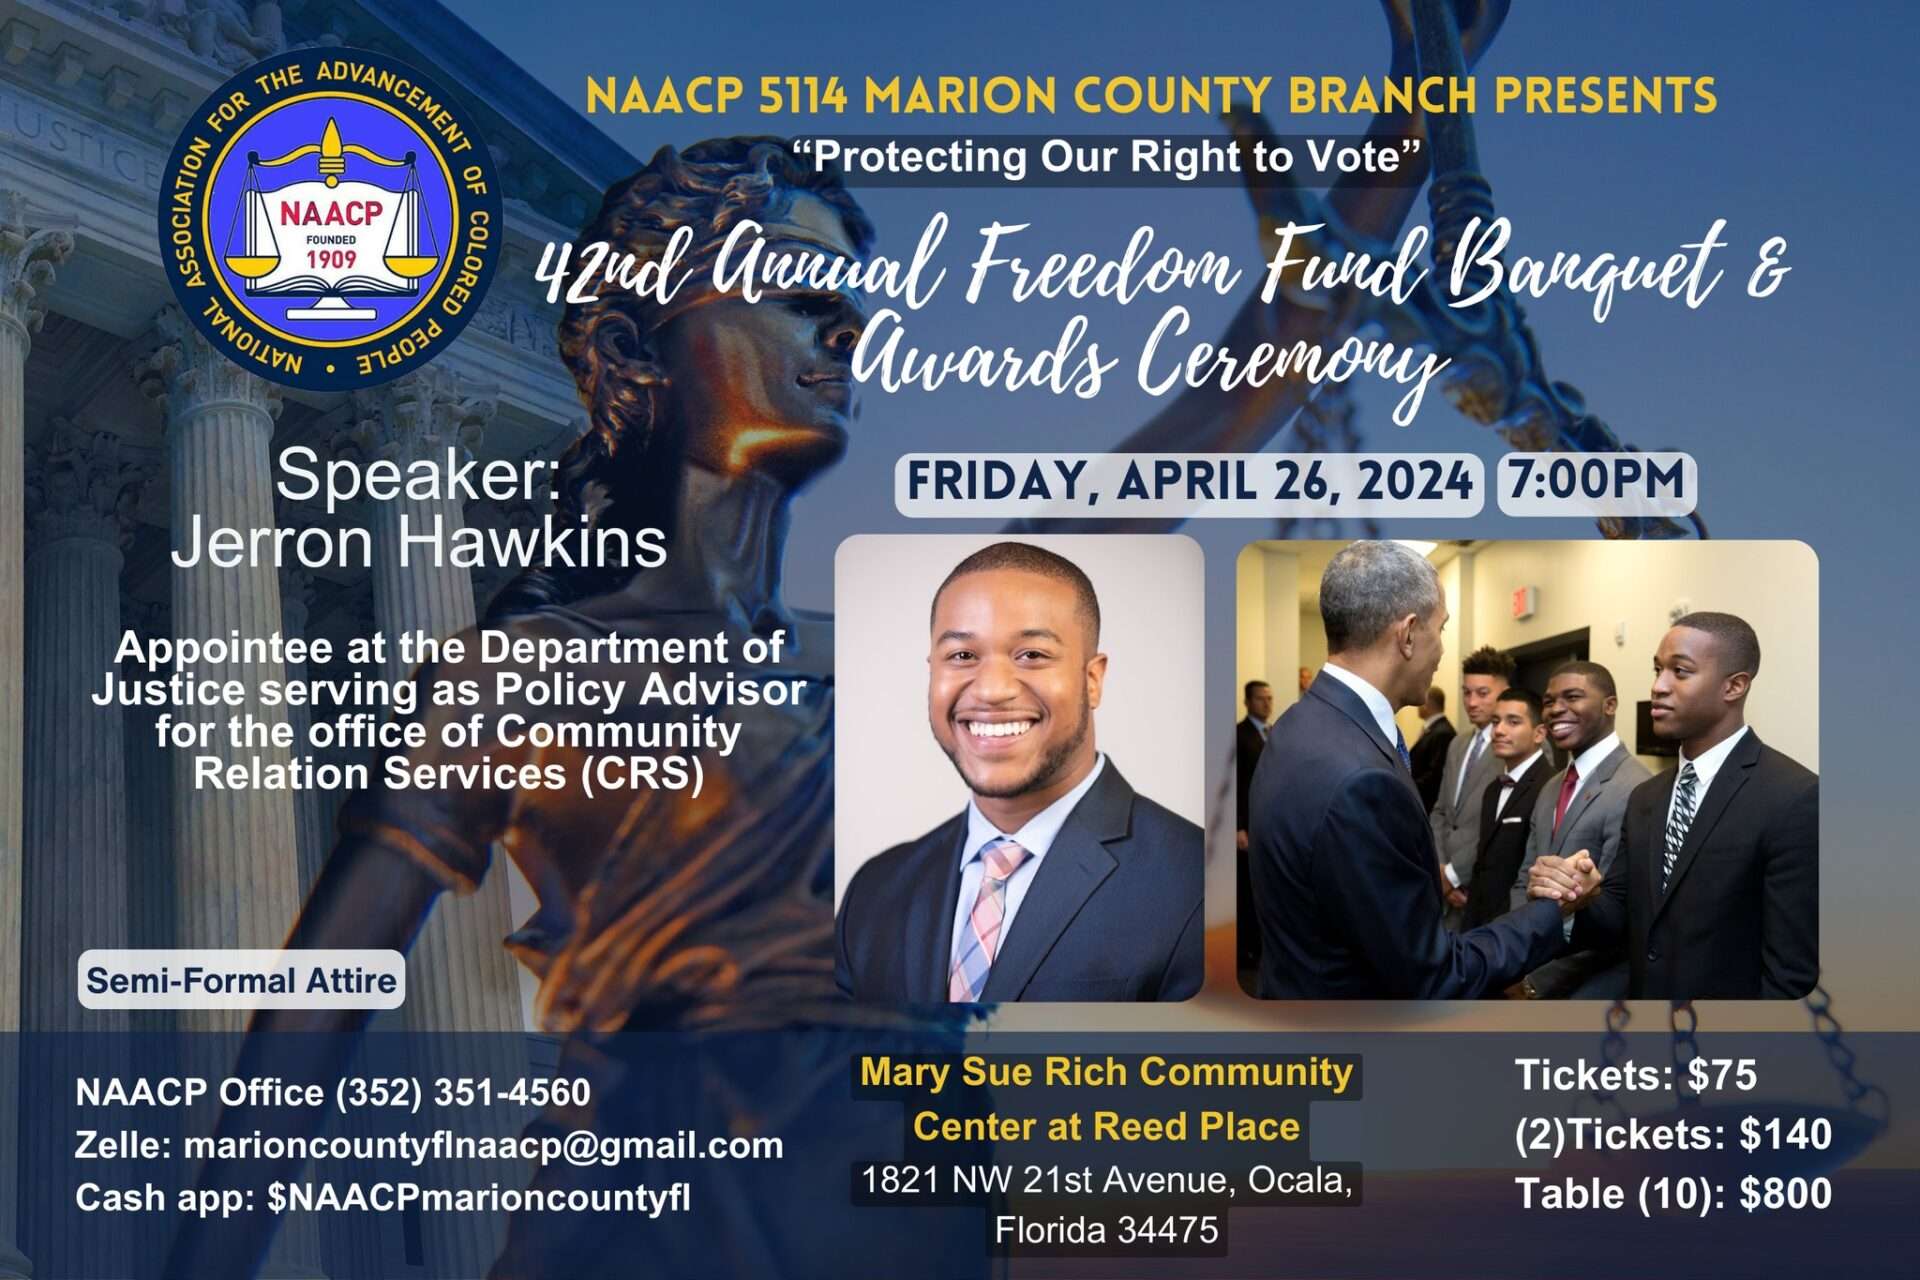 42nd annual freedom fund banquet and awards ceremony